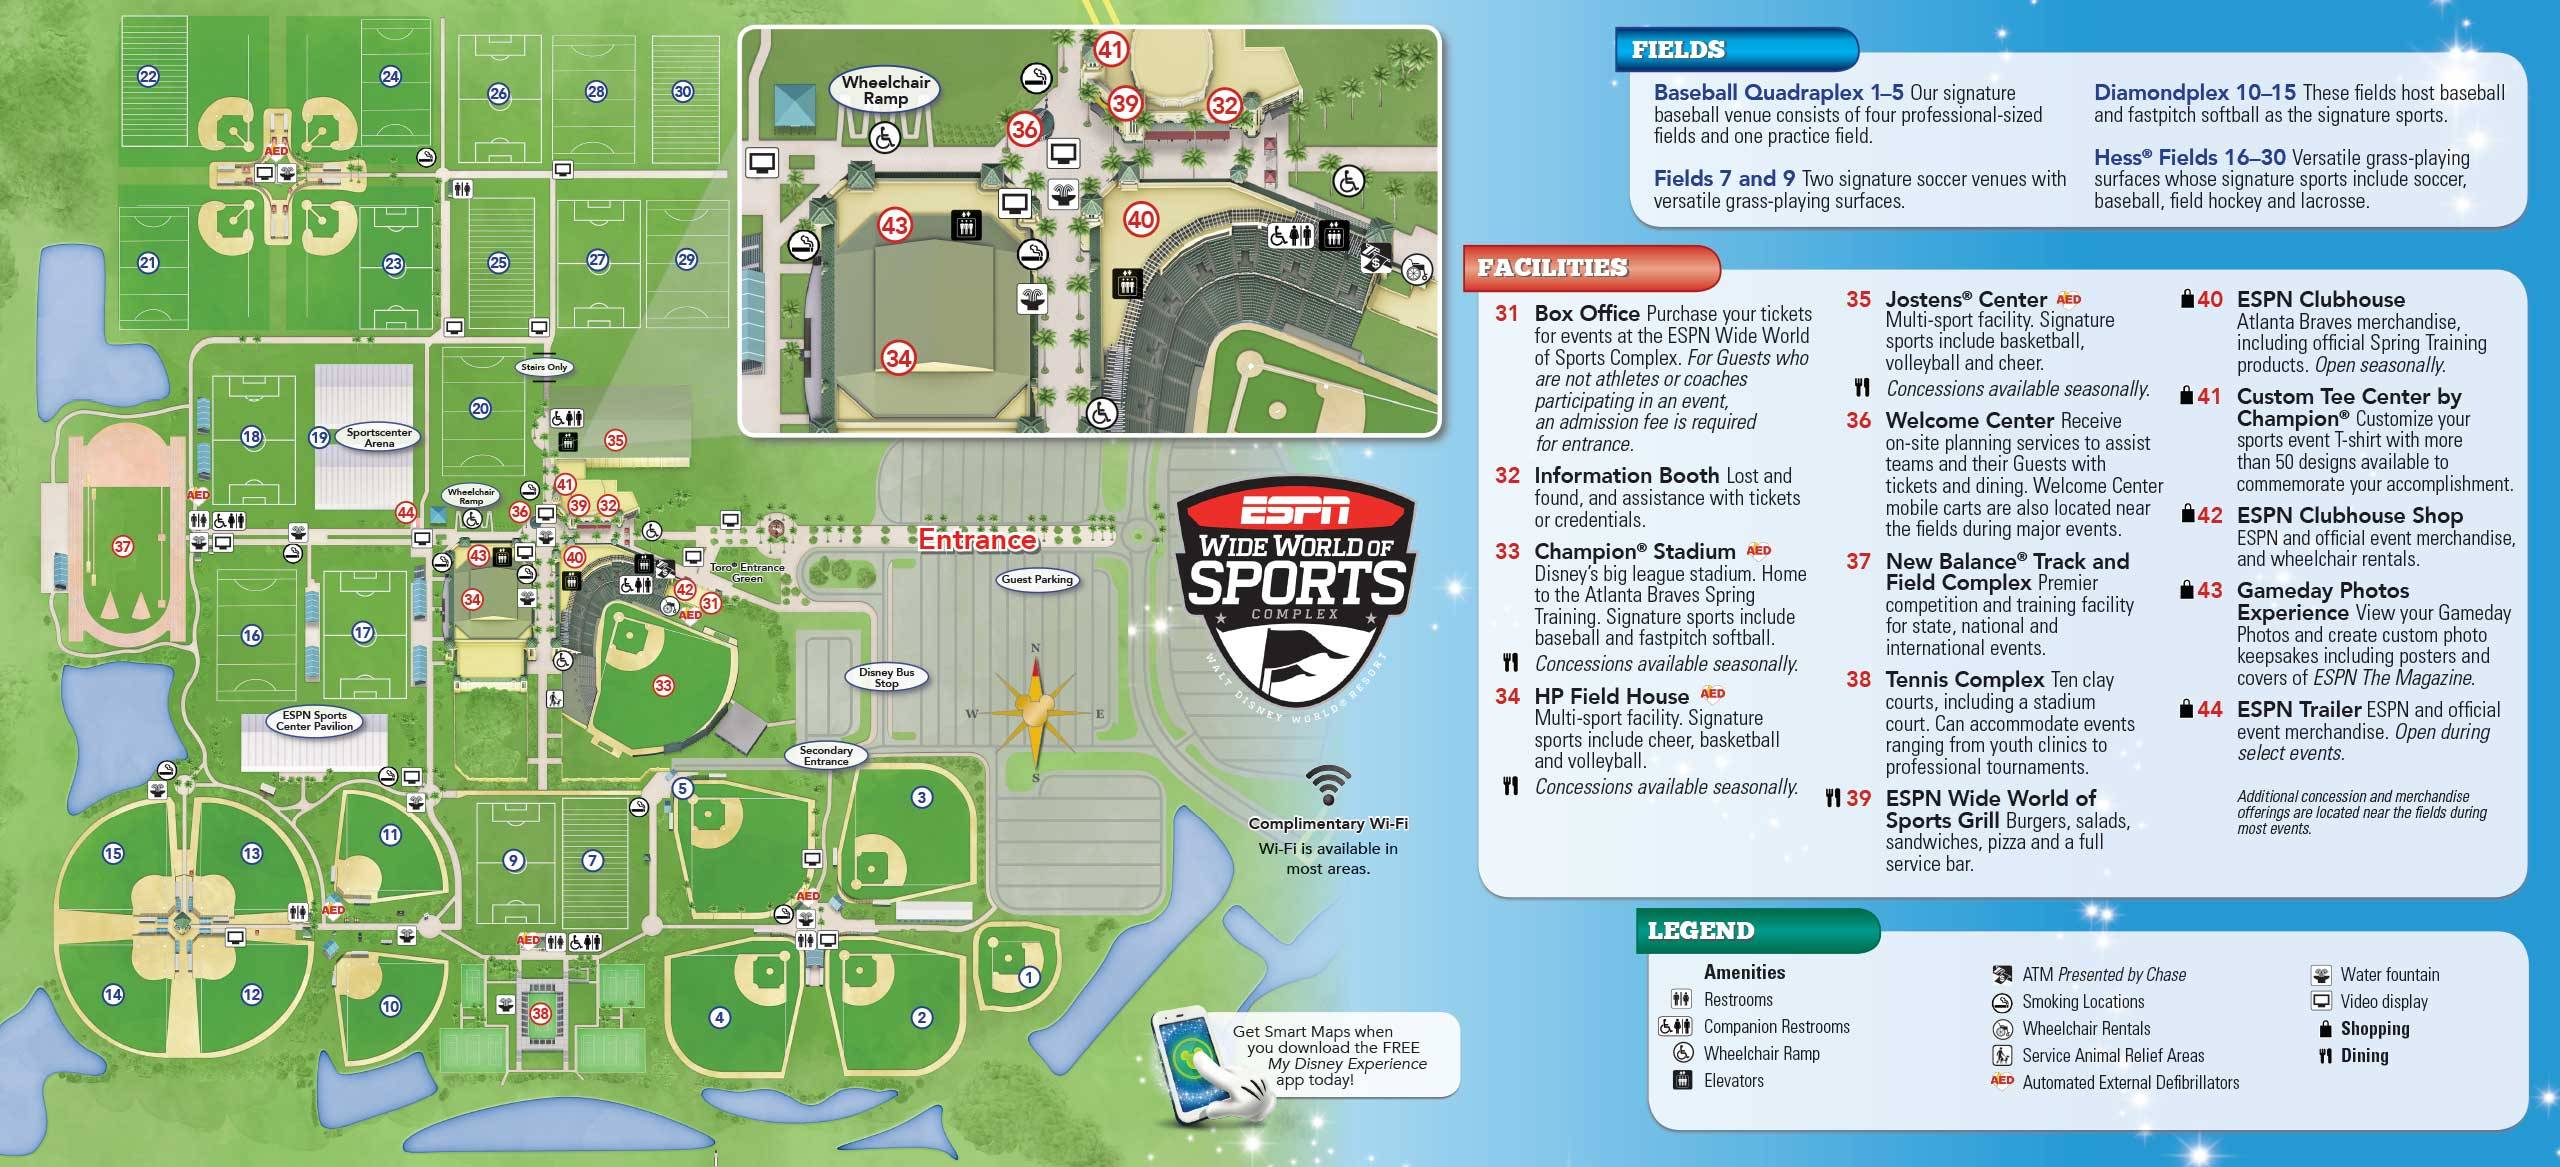 ESPN Wide World of Sports Guide Map May 2016 - Back